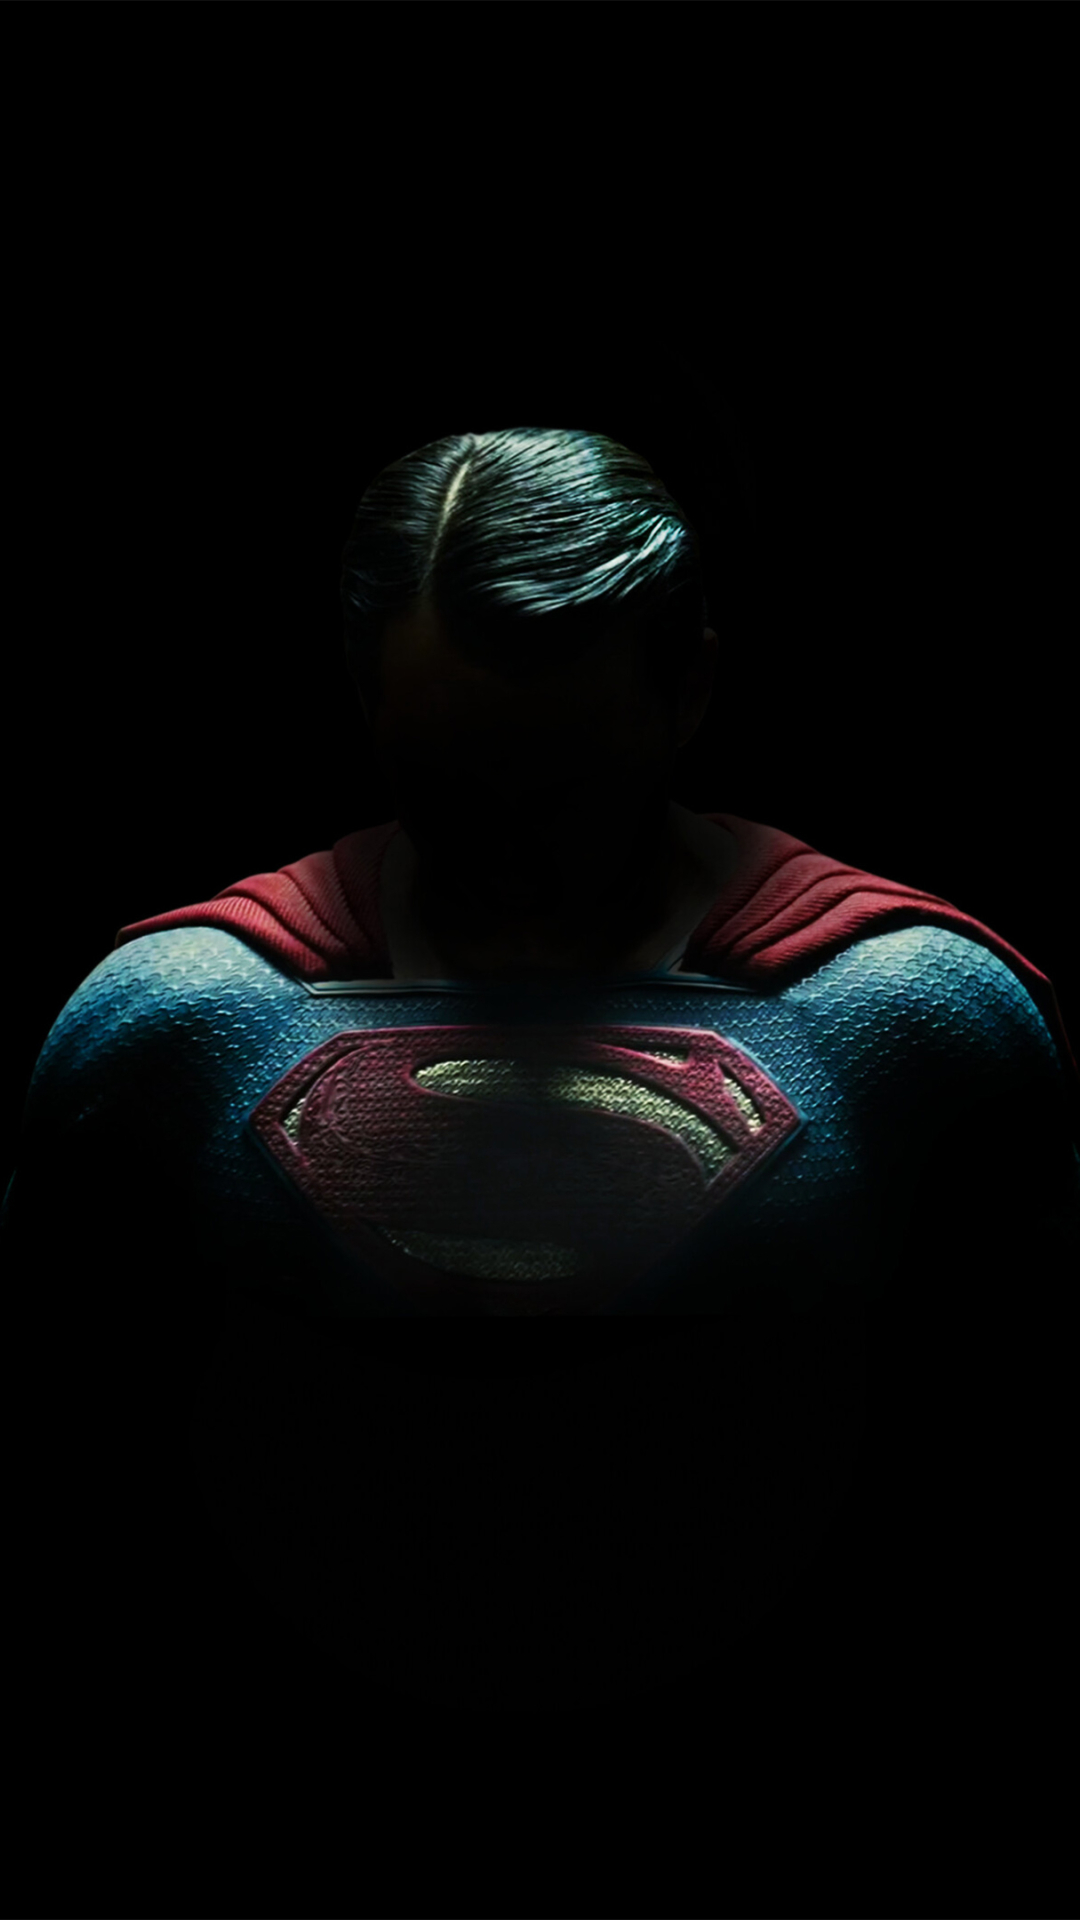 1080x19 Superman Amoled Iphone 7 6s 6 Plus And Pixel Xl One Plus 3 3t 5 Wallpaper Hd Superheroes 4k Wallpapers Images Photos And Background